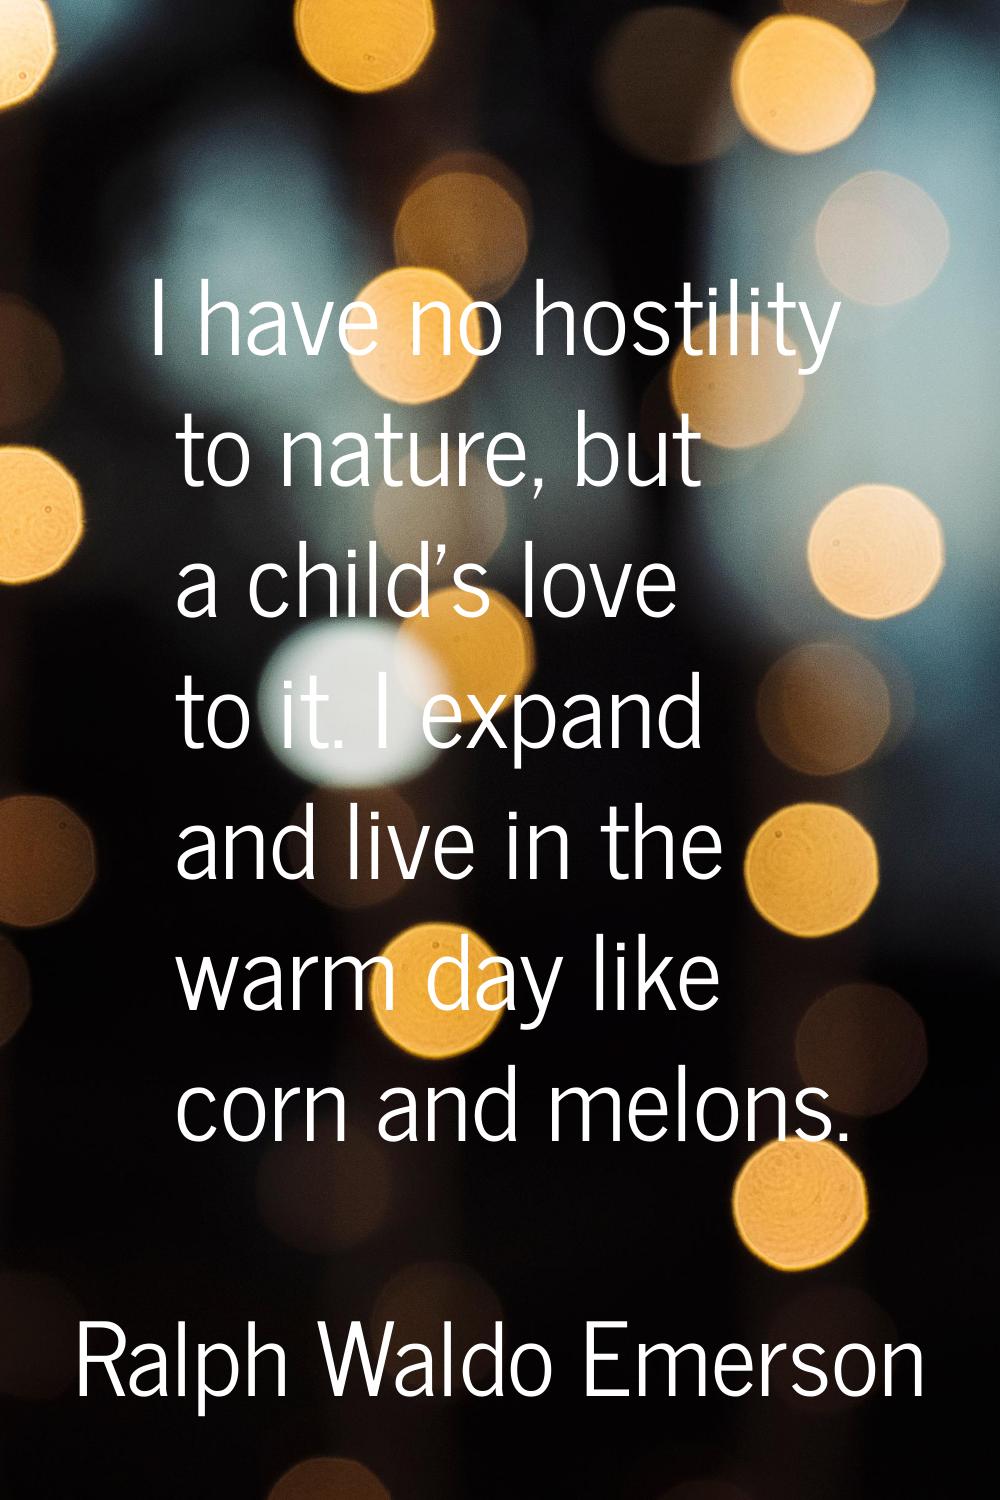 I have no hostility to nature, but a child's love to it. I expand and live in the warm day like cor